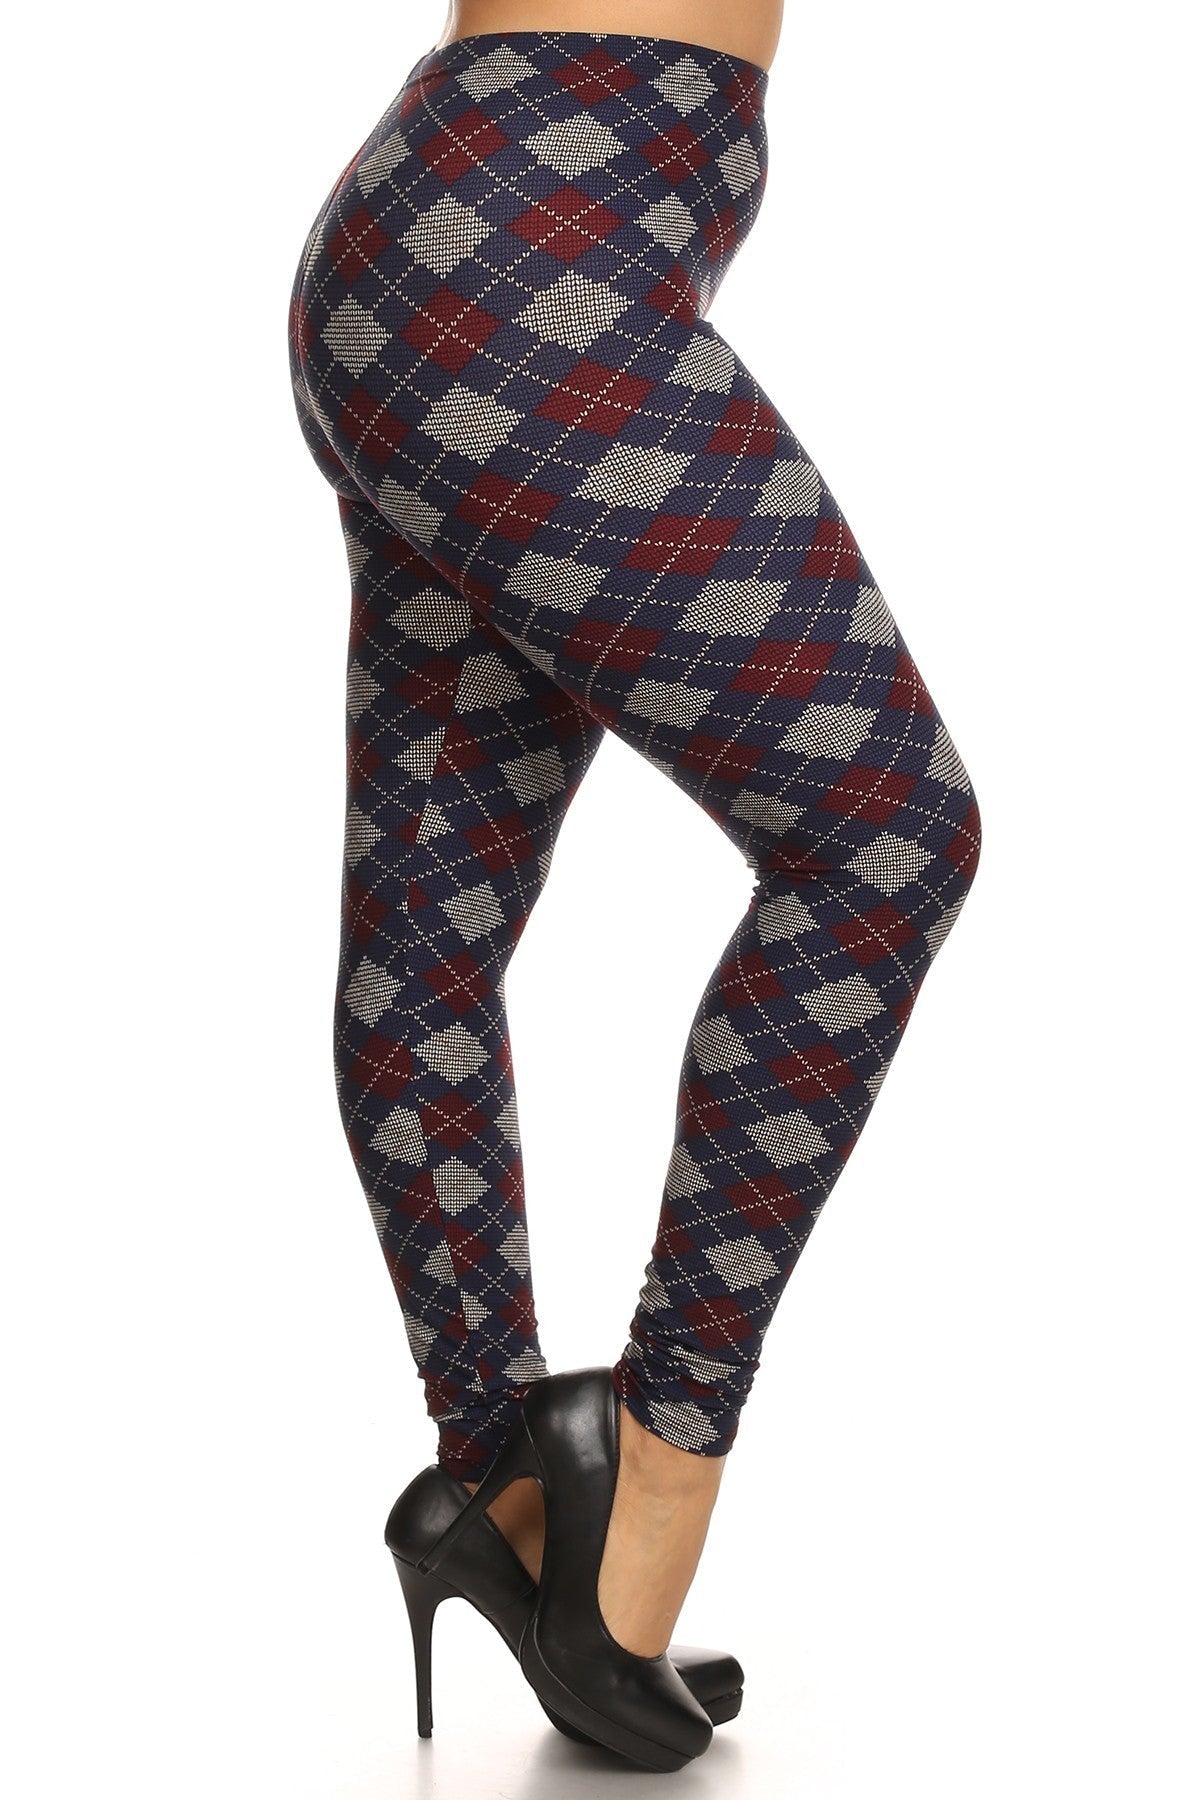 Plus Size Plaid Graphic Printed Knit Legging With Elastic Waist Detail | us.meeeshop